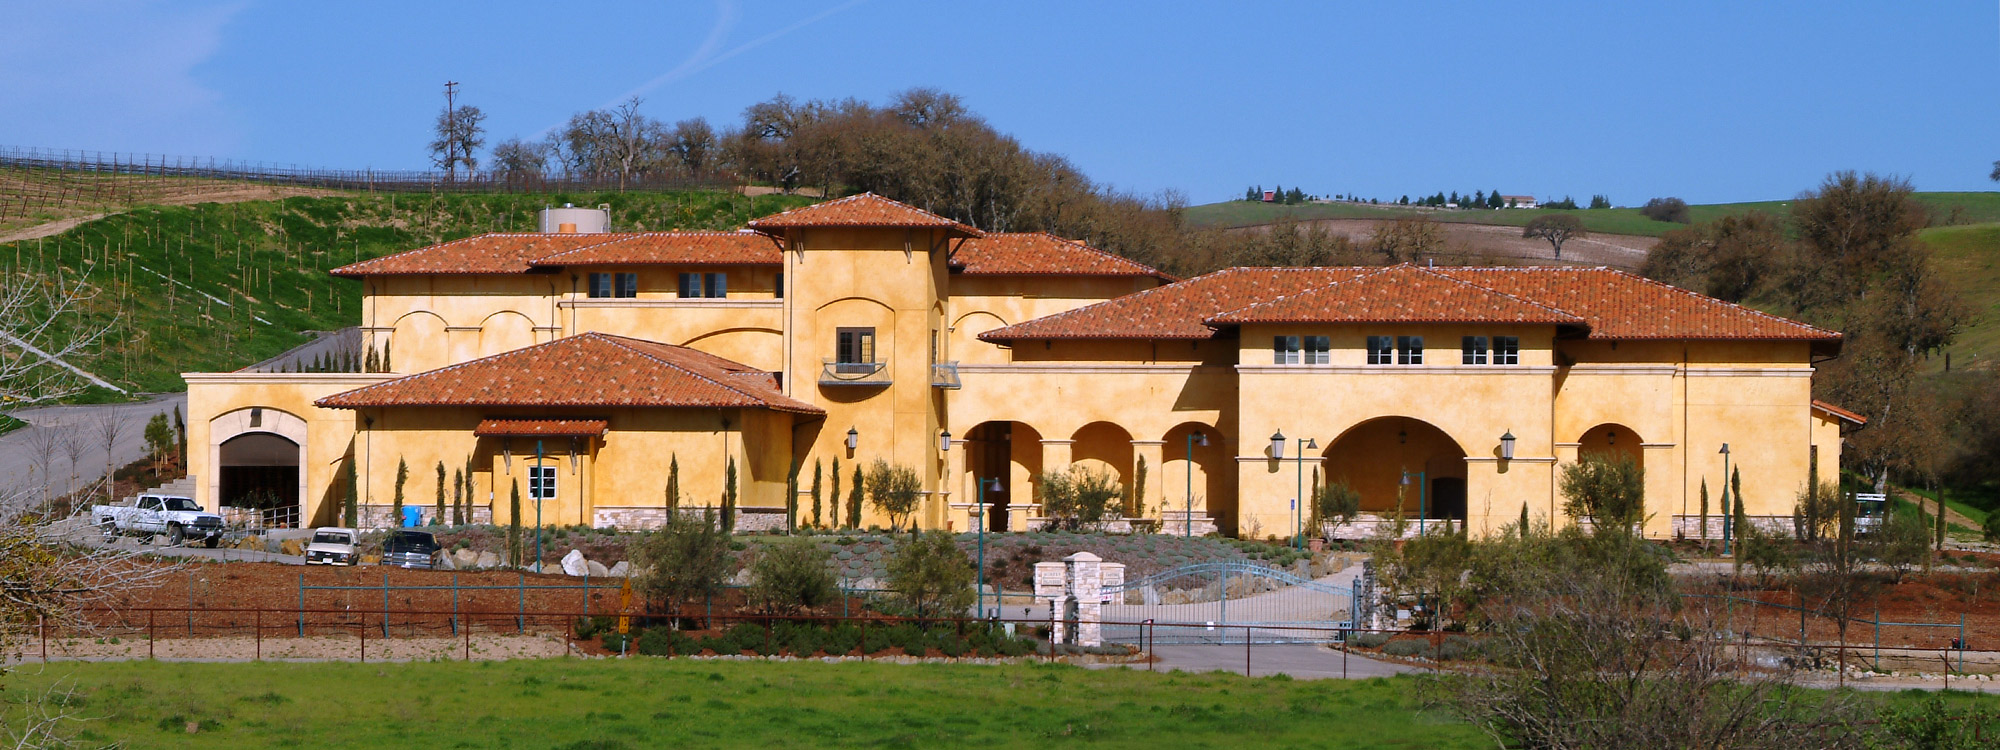 Paso Robles Construction Firm - Winery Construction and Developement - JW Design & Construction